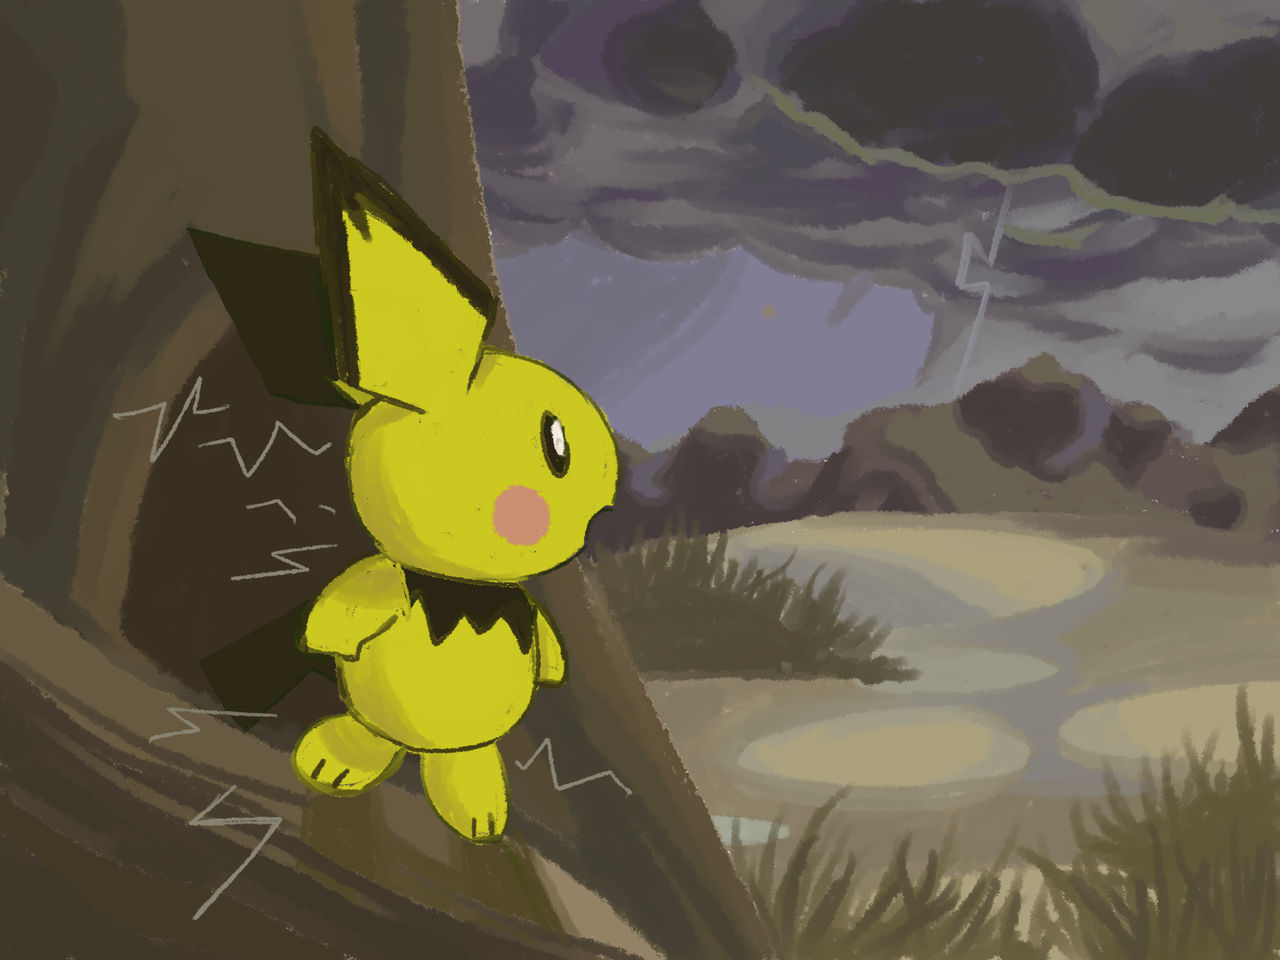 A digital painting of the pokemon pichu done in 2019. Inspired by art by pokemon card artist Naoyo Kimura.